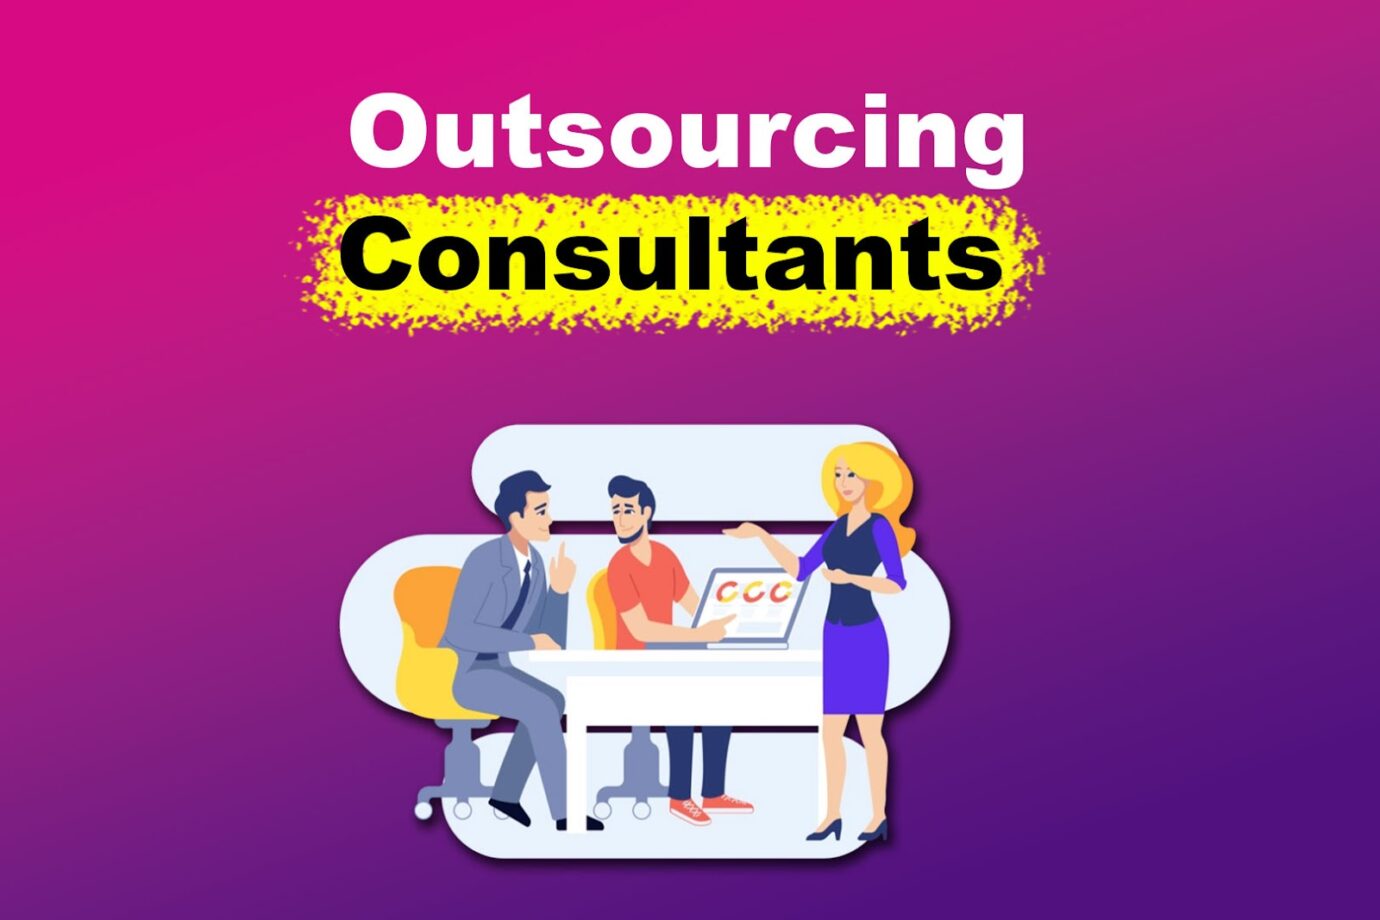 Outsourcing Consultants [Who They Are & What They Do]